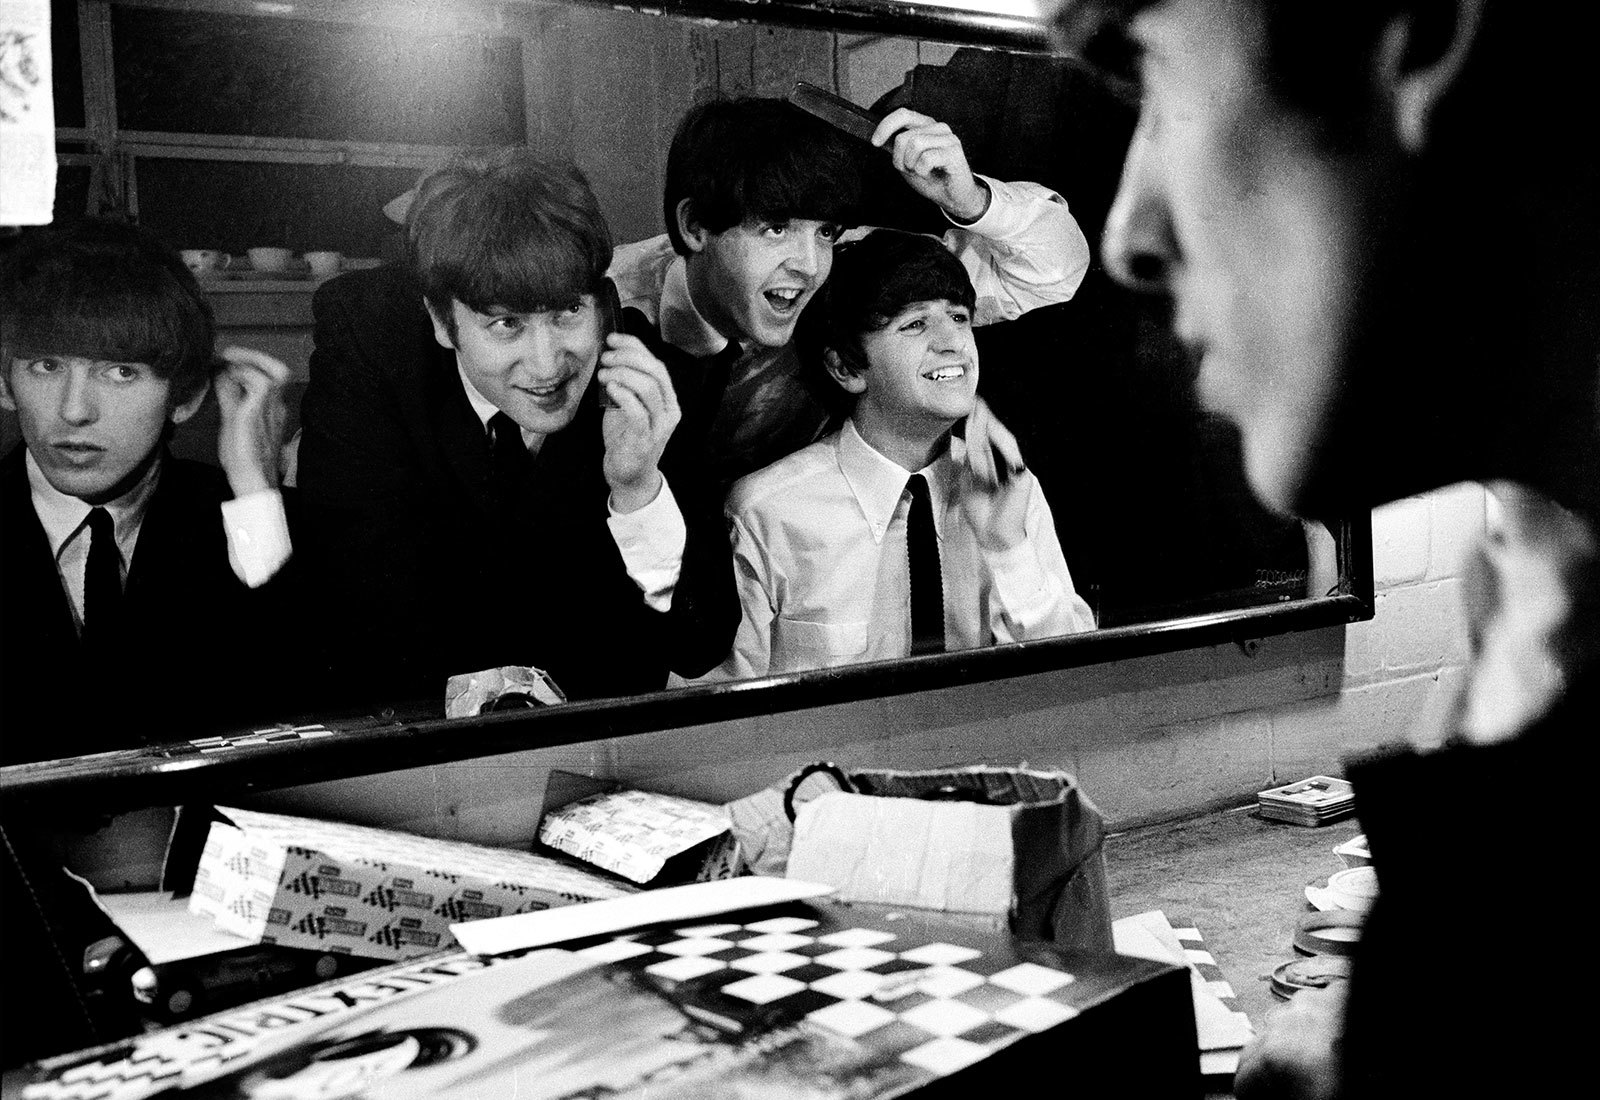 George Harrison, John Lennon, Paul McCartney and Ringo Starr in a still shot from the move Eight Days A Week